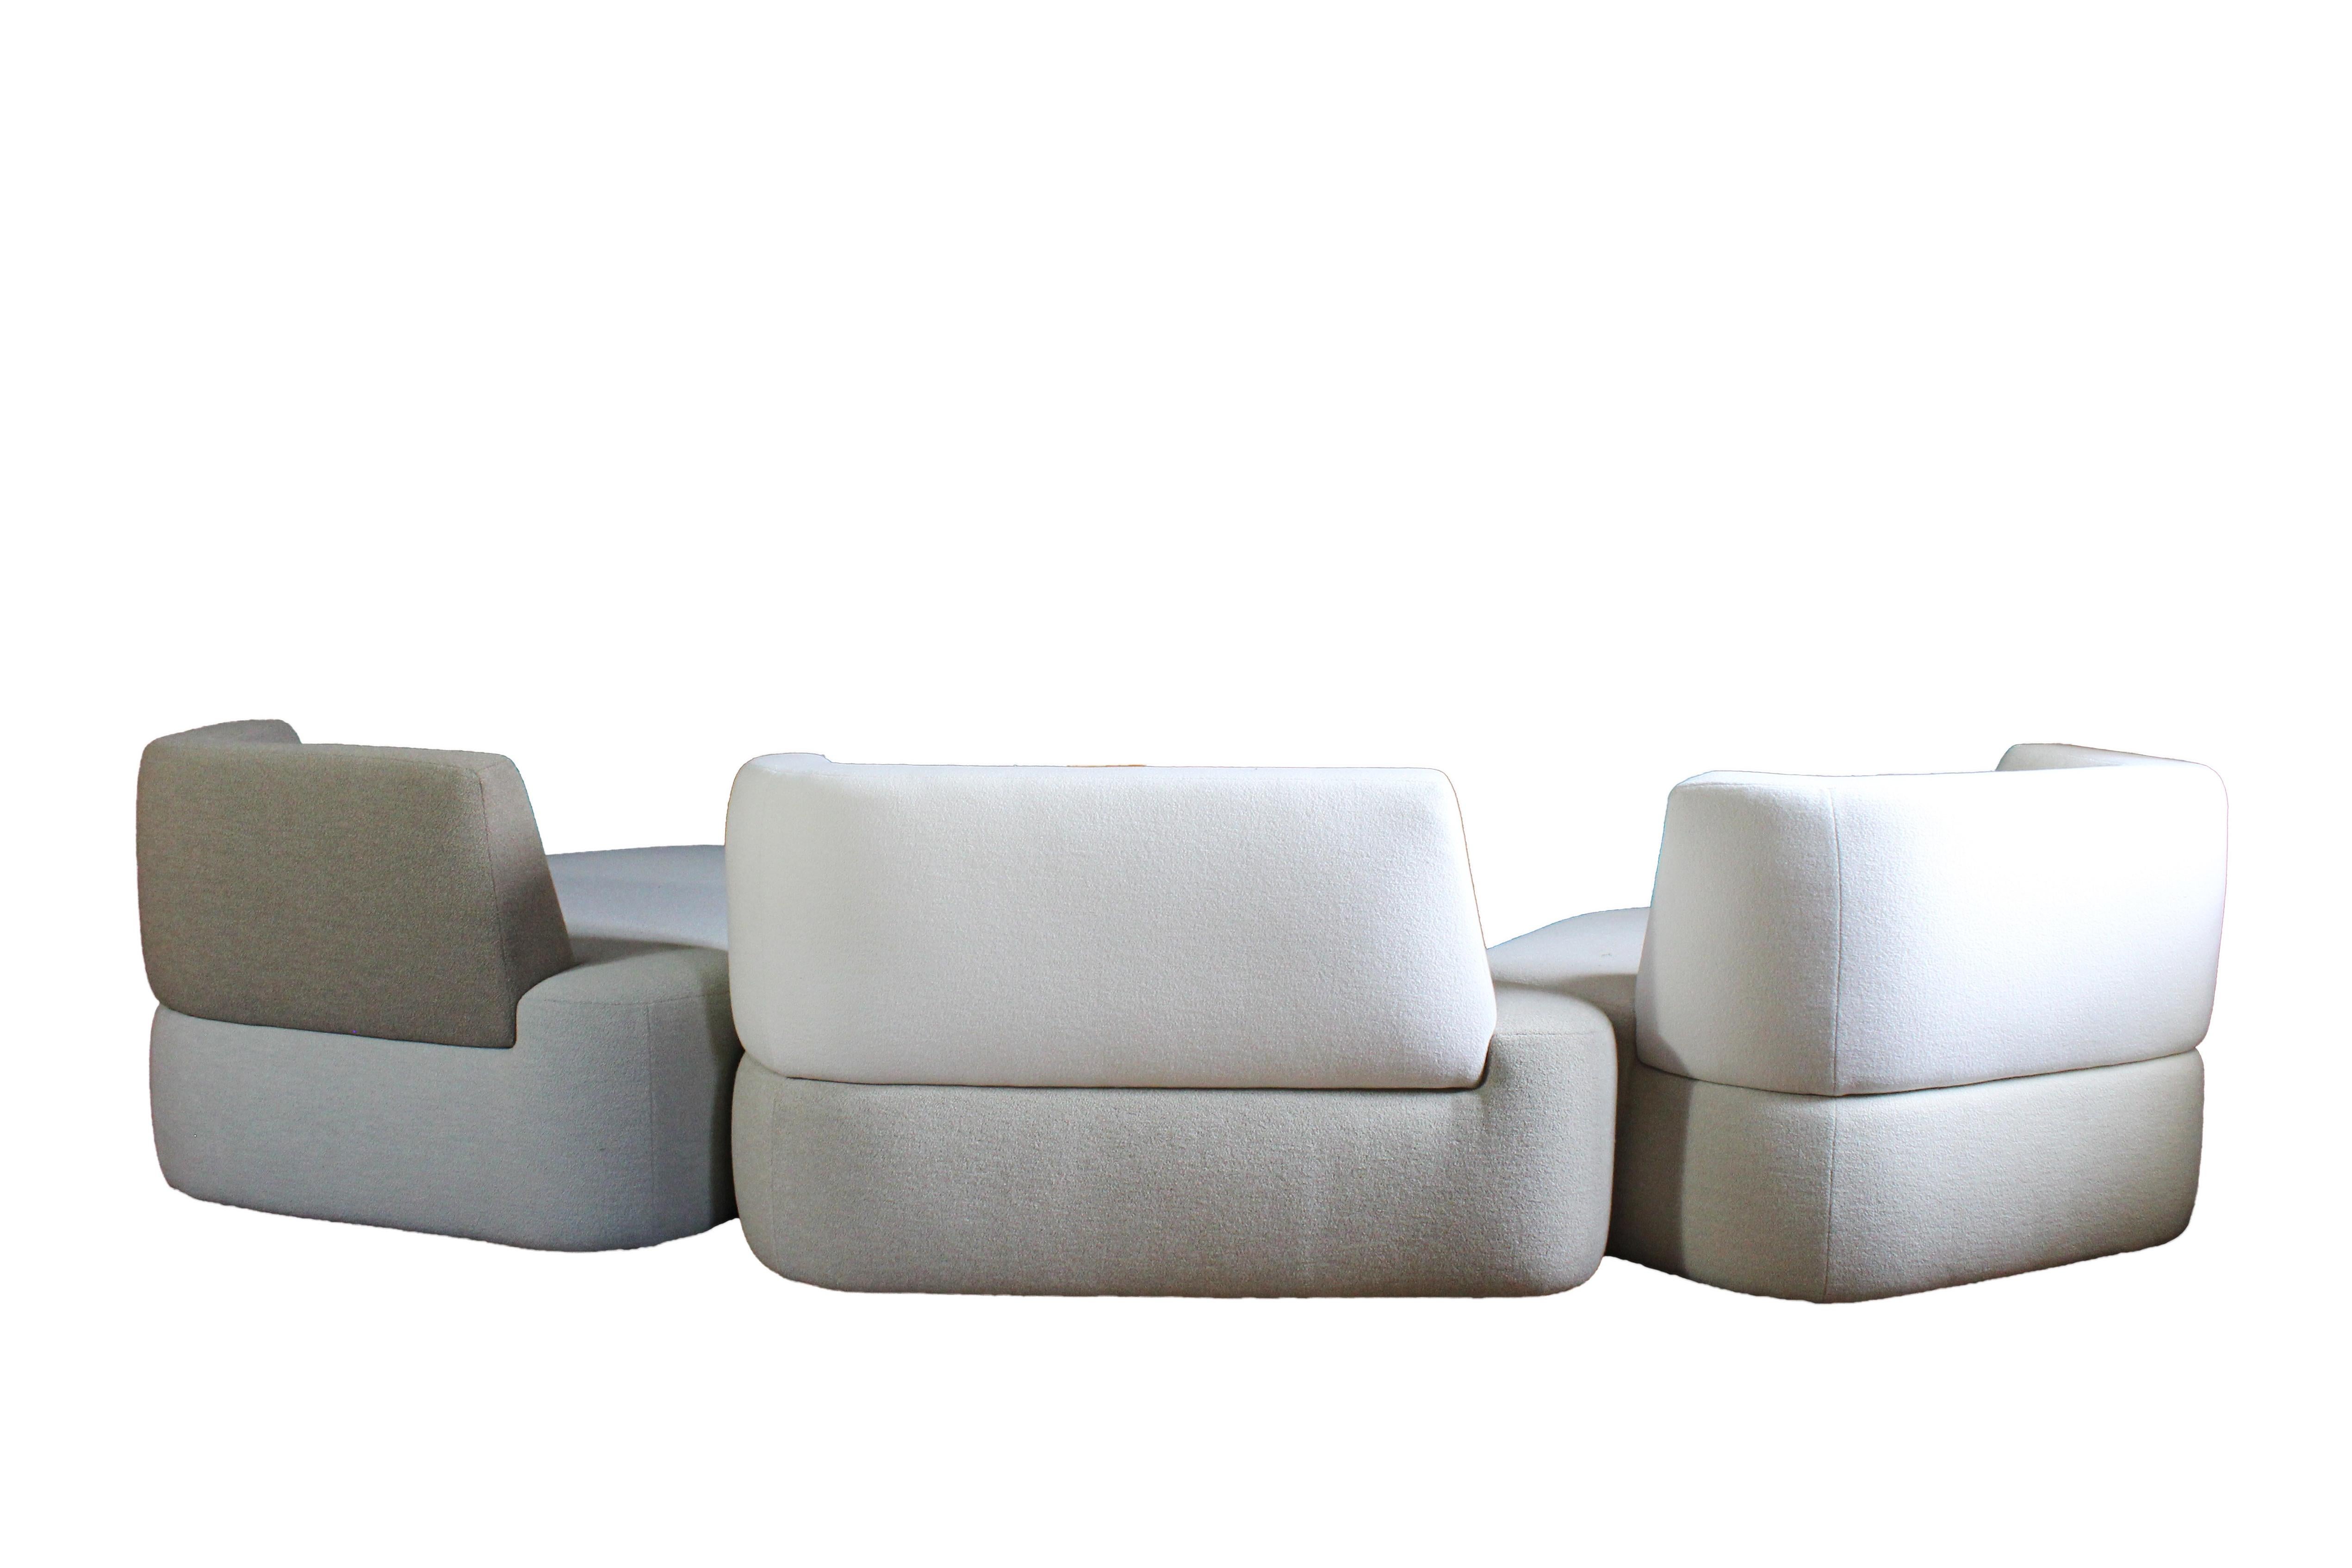 French Sofa in White, Cream, Brown Wool Handmade in France Customizable For Sale